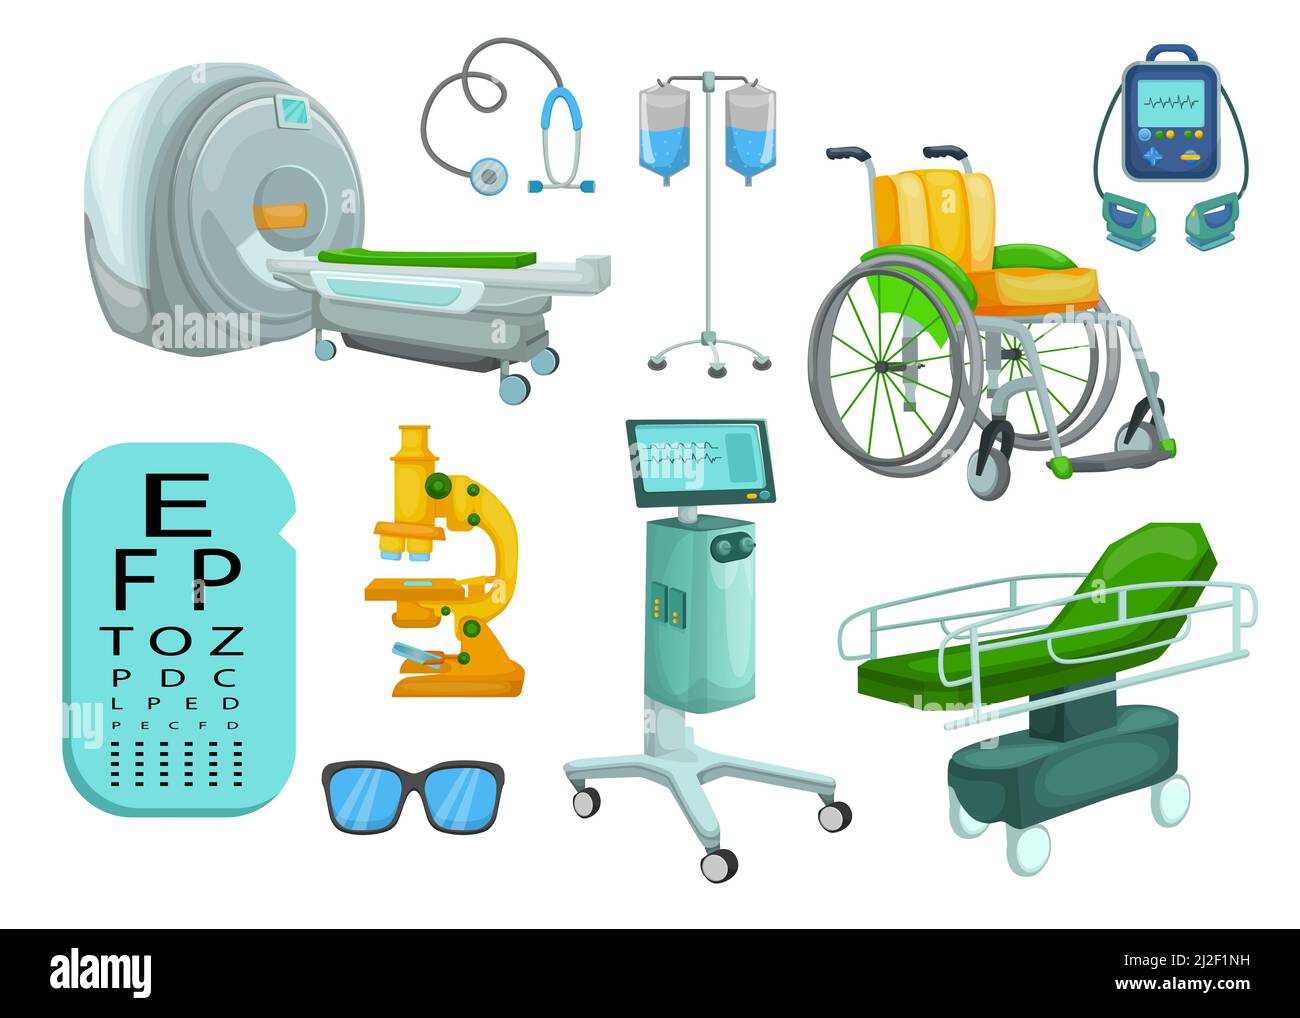 Set of hospital medical equipment and devices vector cartoon. Tomograph, scanner, X-ray, MRI, fluorography, mammography. Health system, medical concep Stock Vector